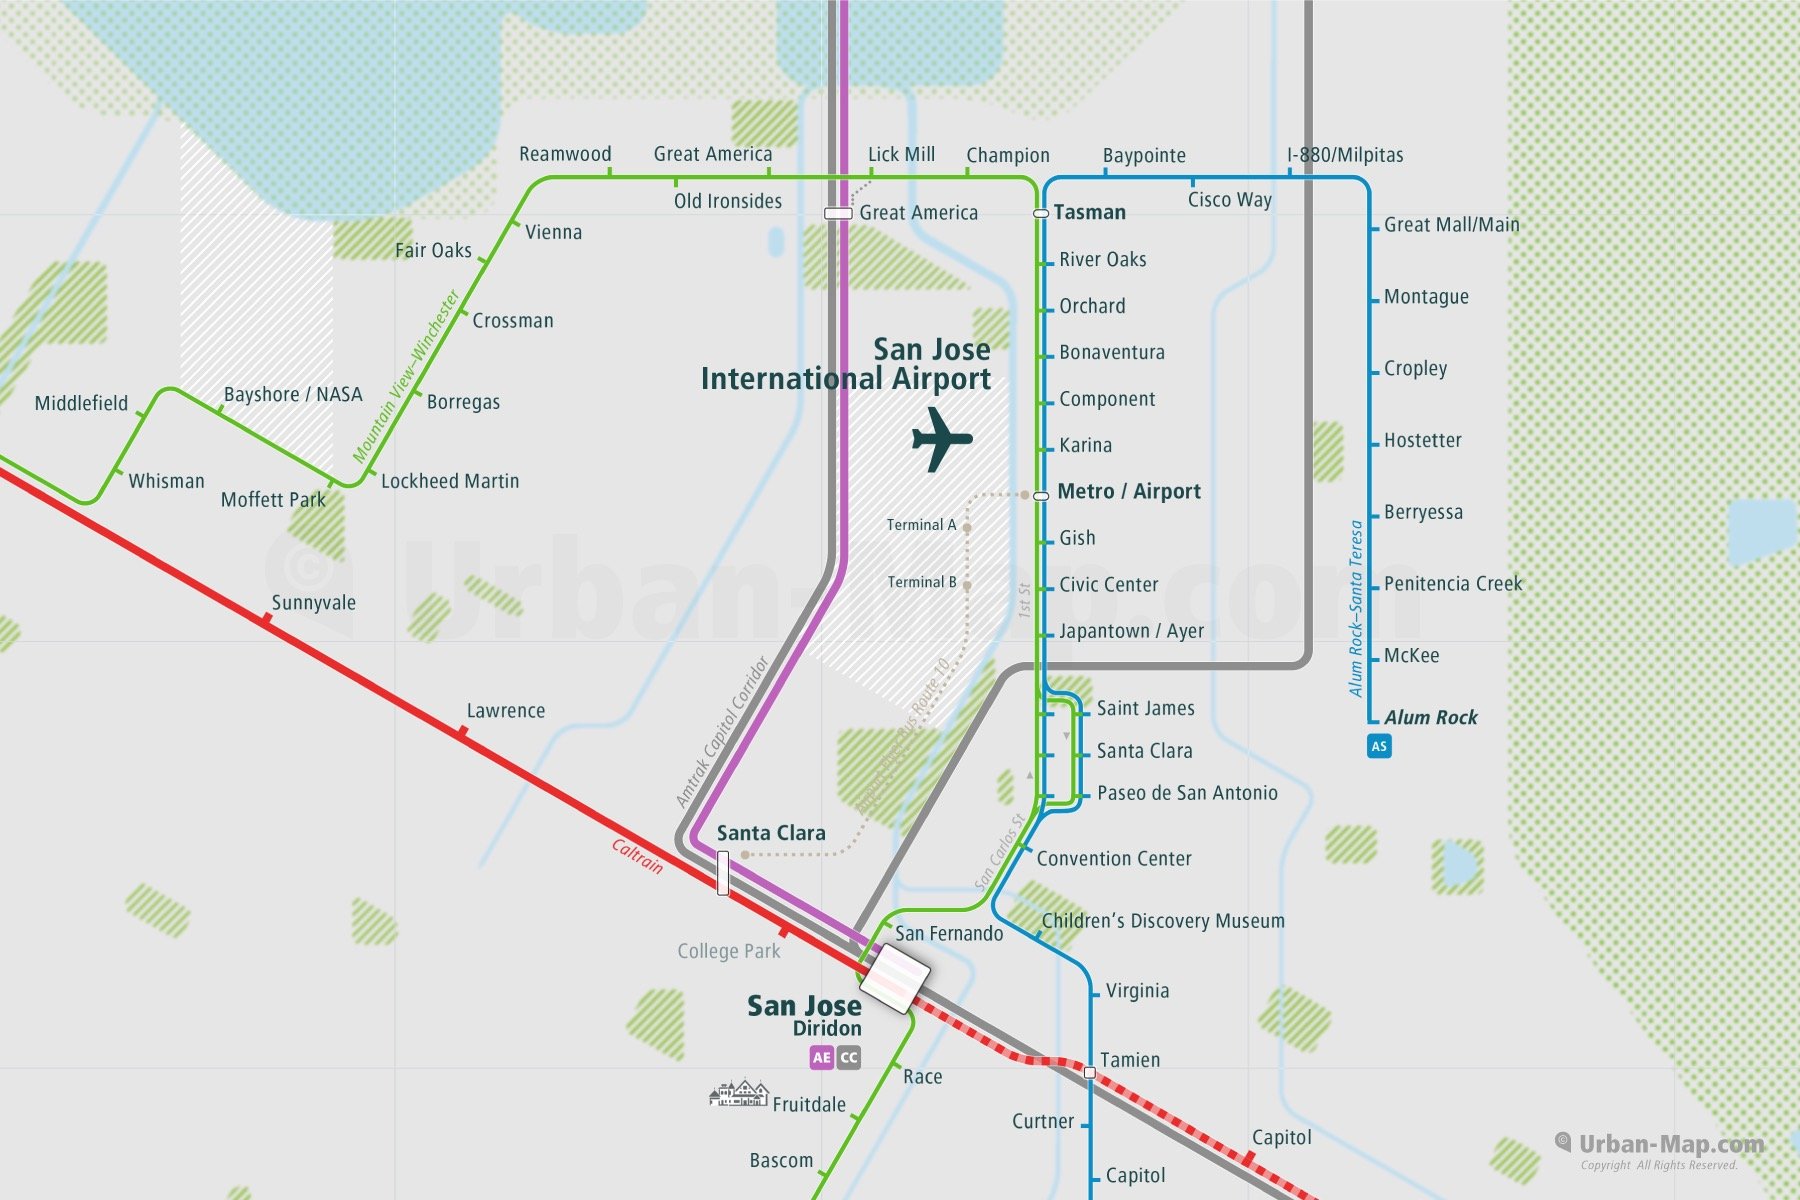 San Jose City Rail Map shows the train and public transportation routes of